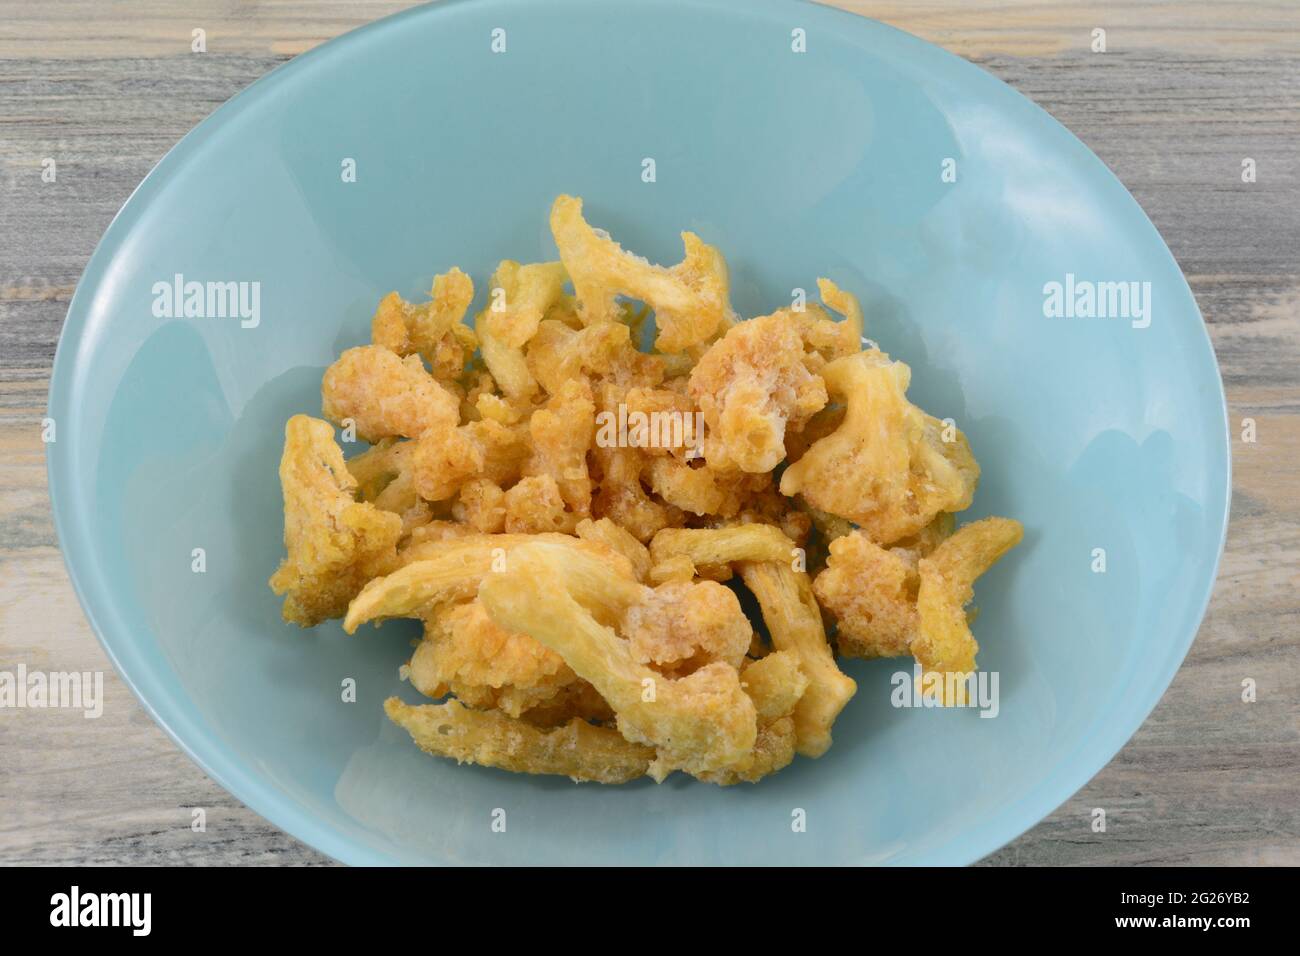 White cheddar cauliflower snack bites in blue bow on table Stock Photo